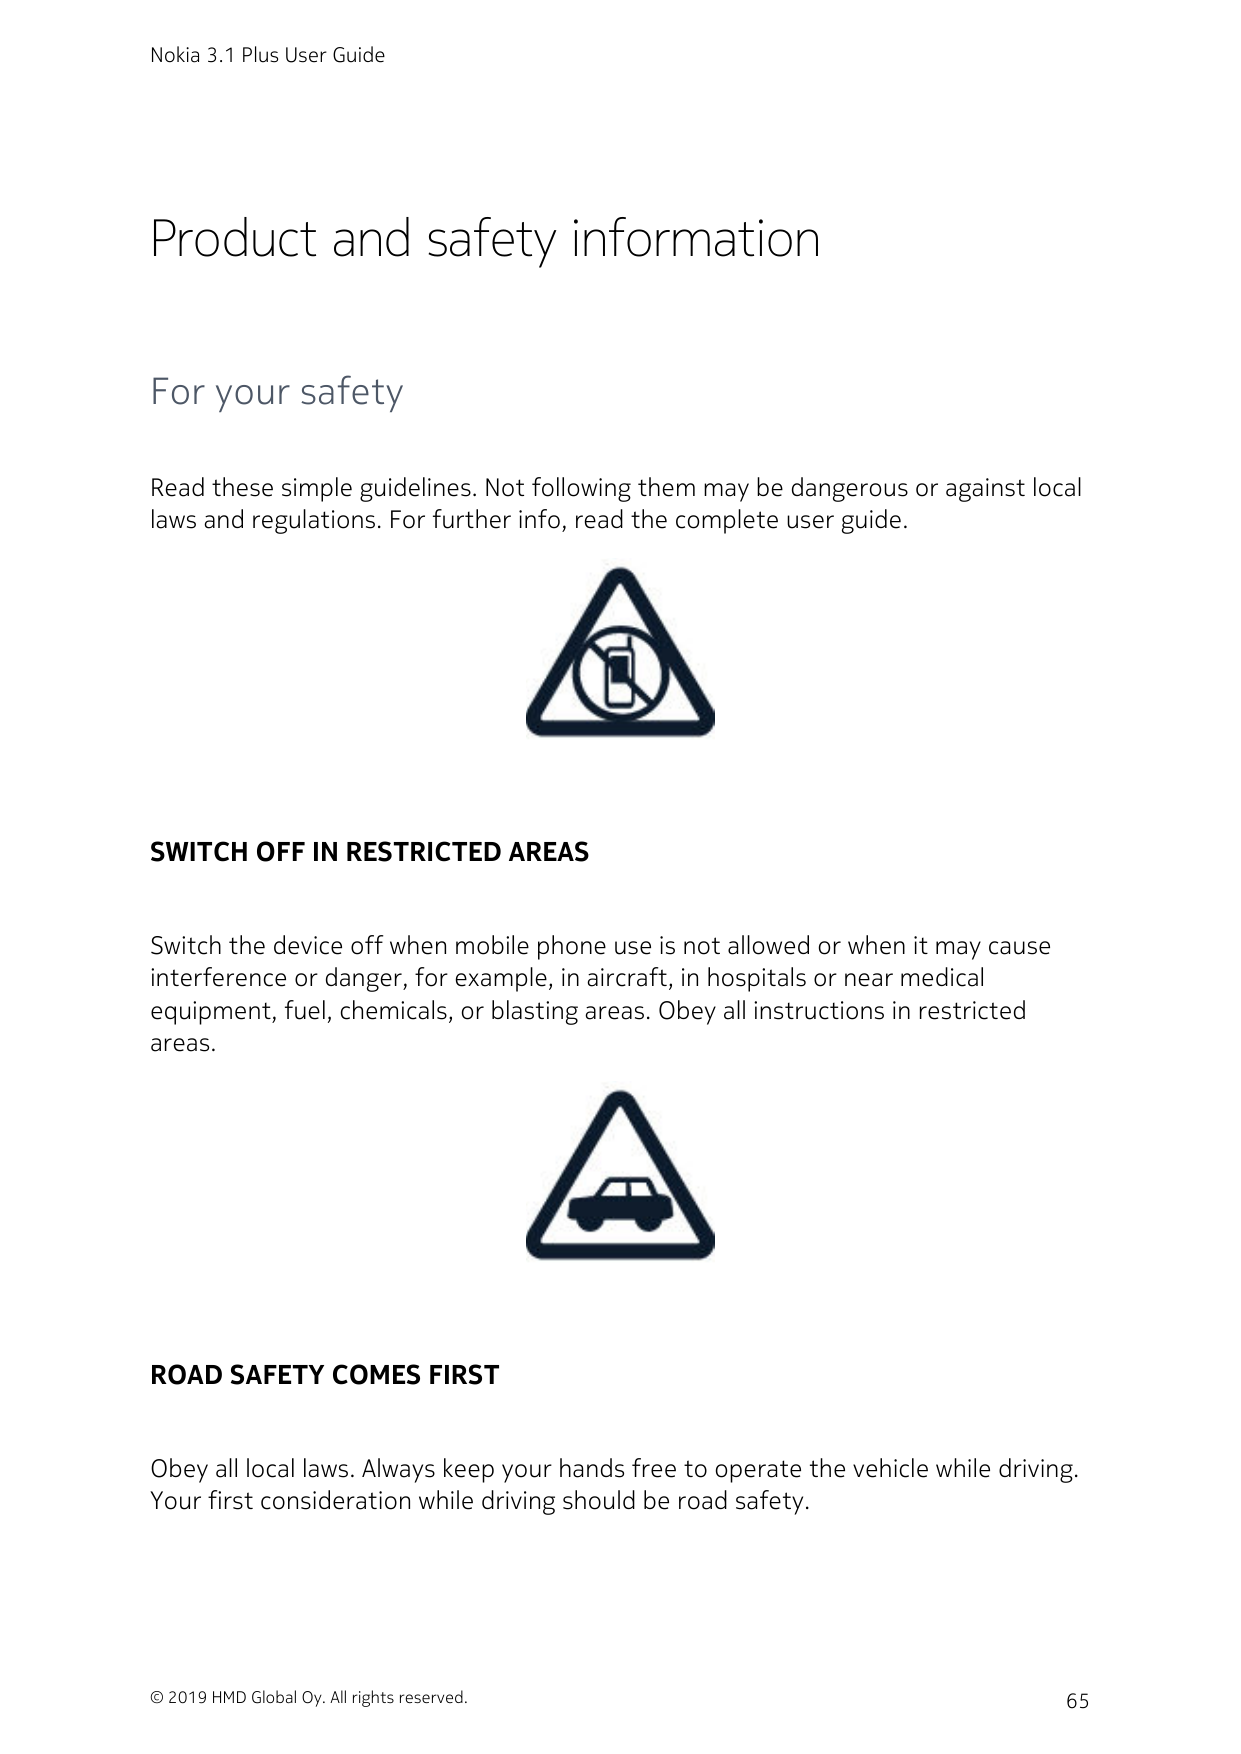 Nokia 3.1 Plus User GuideProduct and safety informationFor your safetyRead these simple guidelines. Not following them may be da